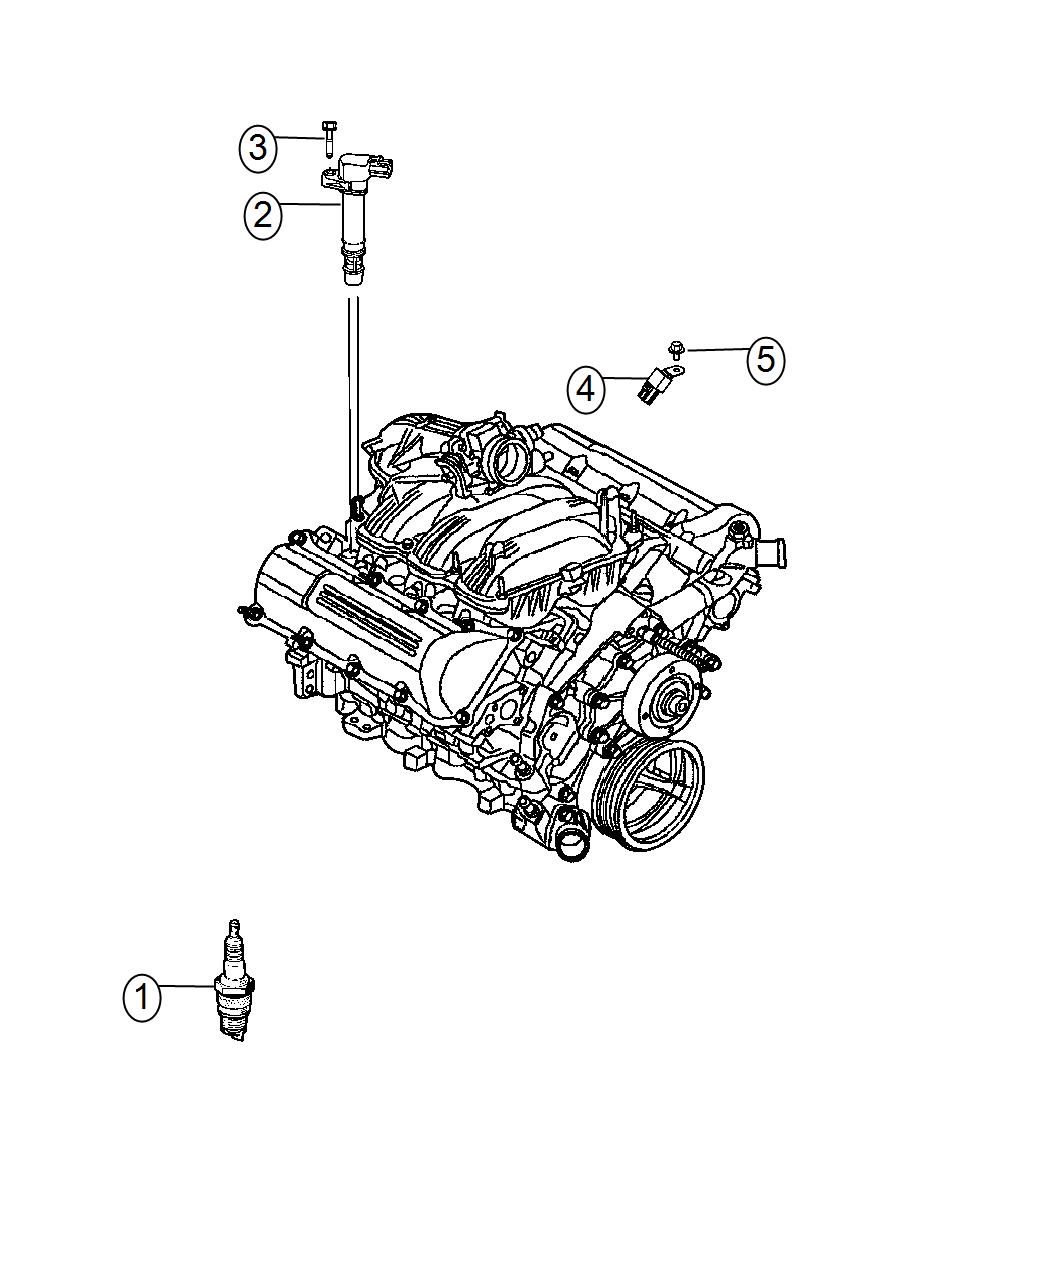 Spark Plugs, Ignition Wires, and Ignition Coil. Diagram